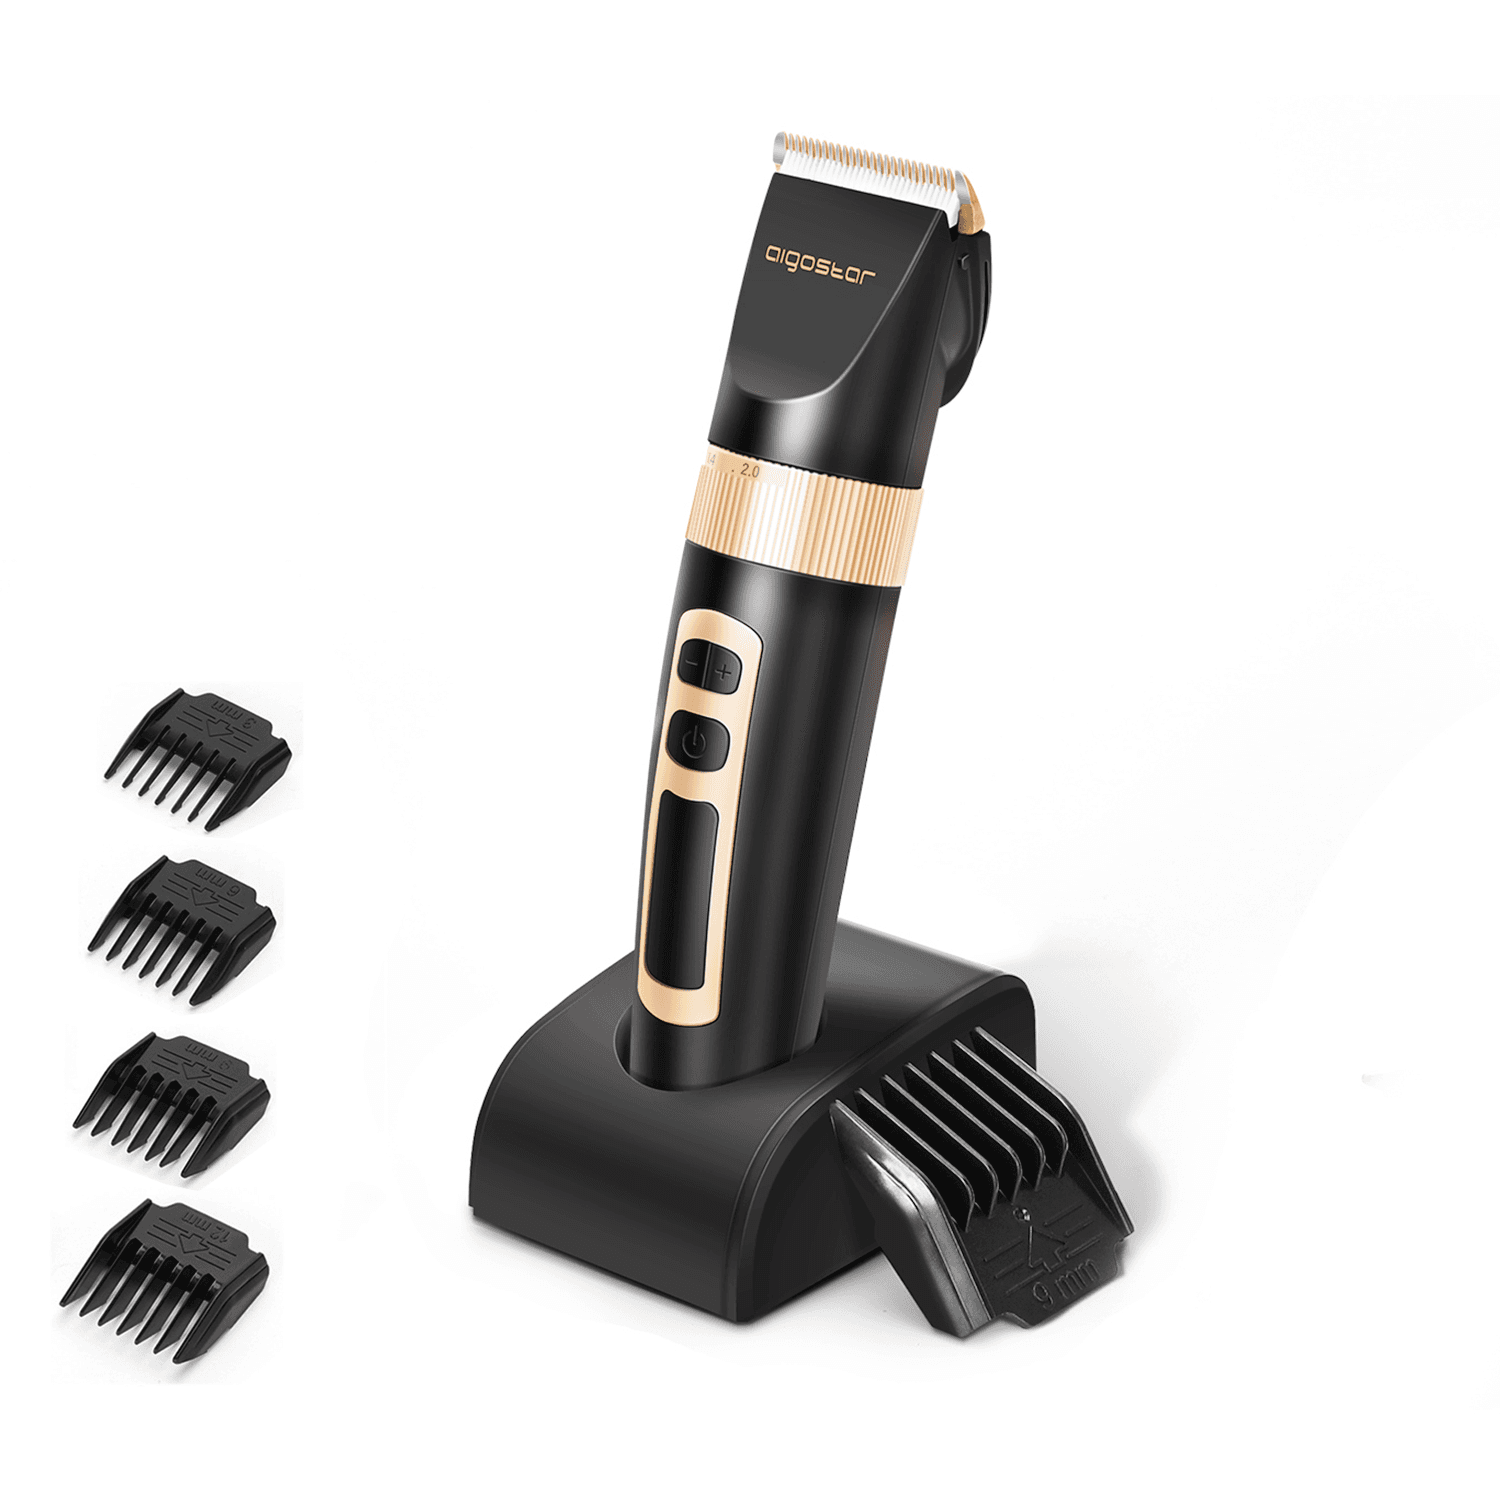 Hair clipper with LED display